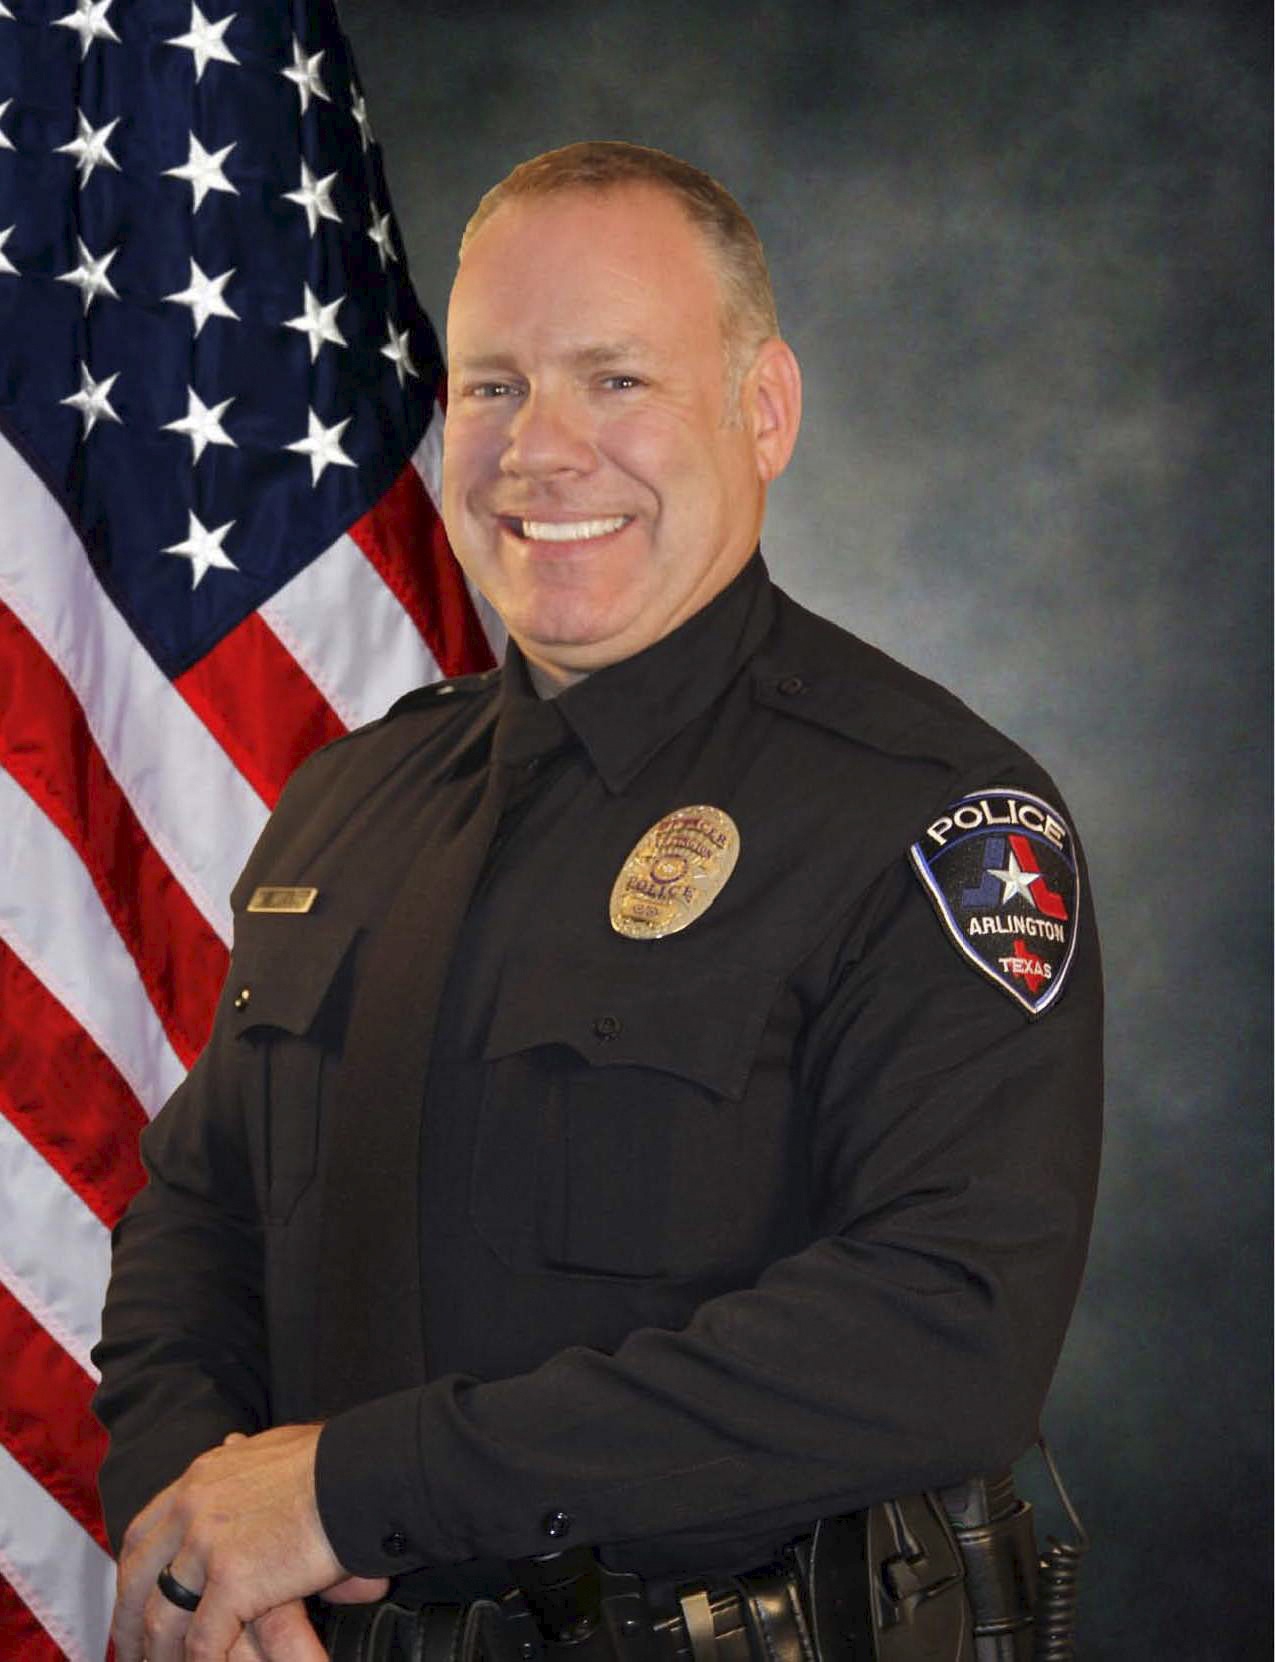 Officer Brad Miller, who is accused of shooting an unarmed black teenager, is seen in a handout photo provided by the Arlington Police Department on August 7, 2015. Miller, who fatally shot black Texas teenager Christian Taylor last week at a Dallas-area car dealership has been fired after making a series of troubling decisions, Arlington Police Chief Will Johnson said August 11, 2015. Photo: Arlington Police Department/ Reuters